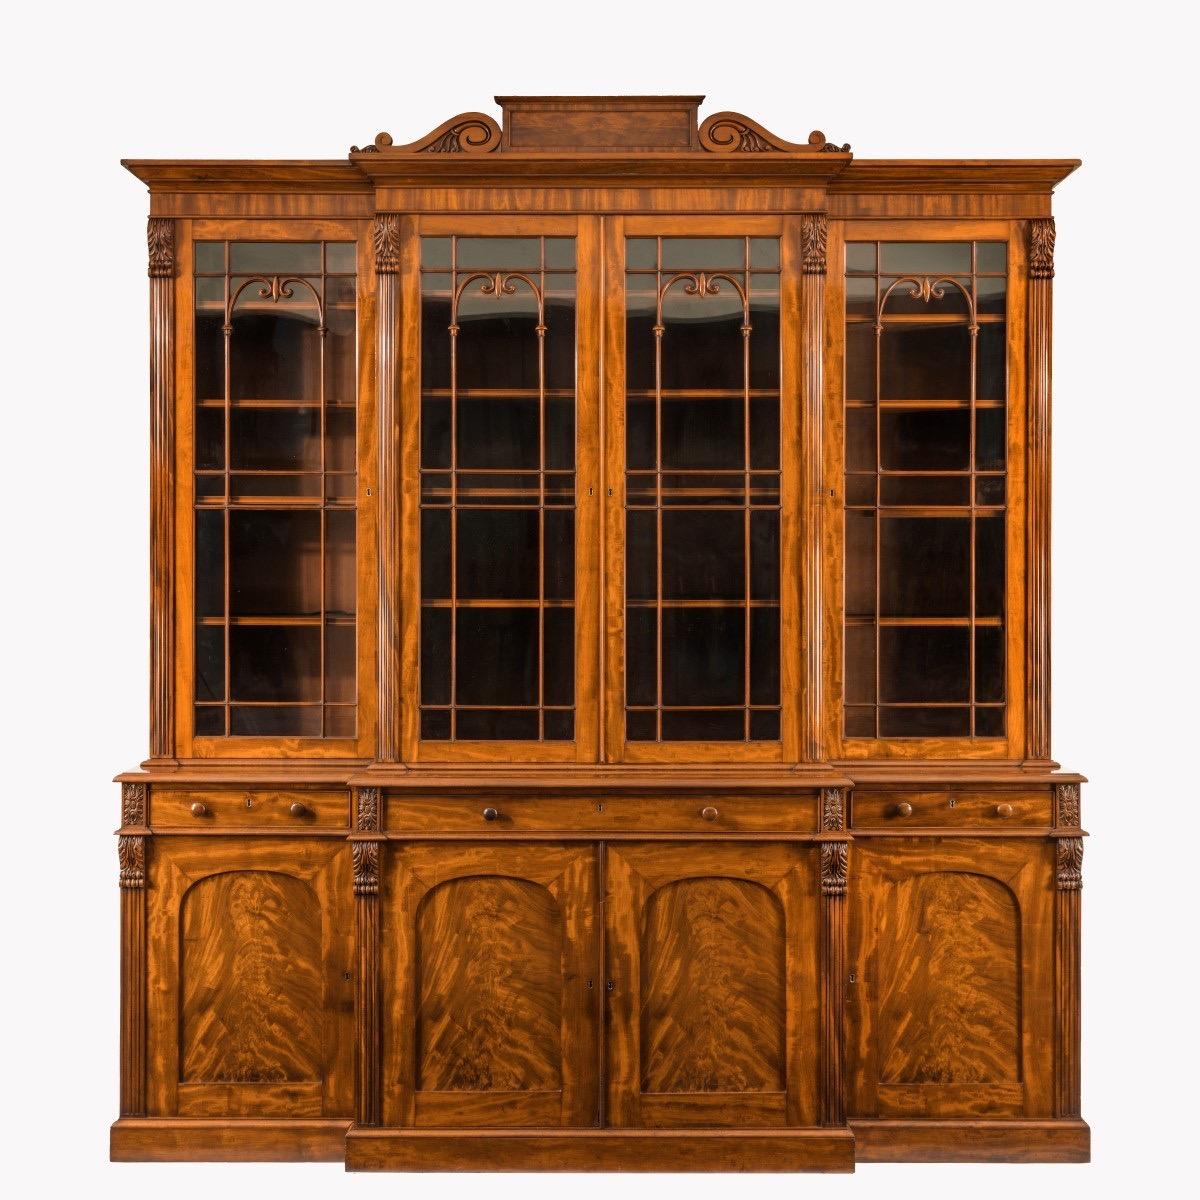 A fine early William IV mahogany breakfront bookcase firmly attributed Gillows of Lancaster, in four sections, the top with astragal glazed doors enclosing four adjustable shelves between reeded pilasters with anthemion scroll corbels, the base with